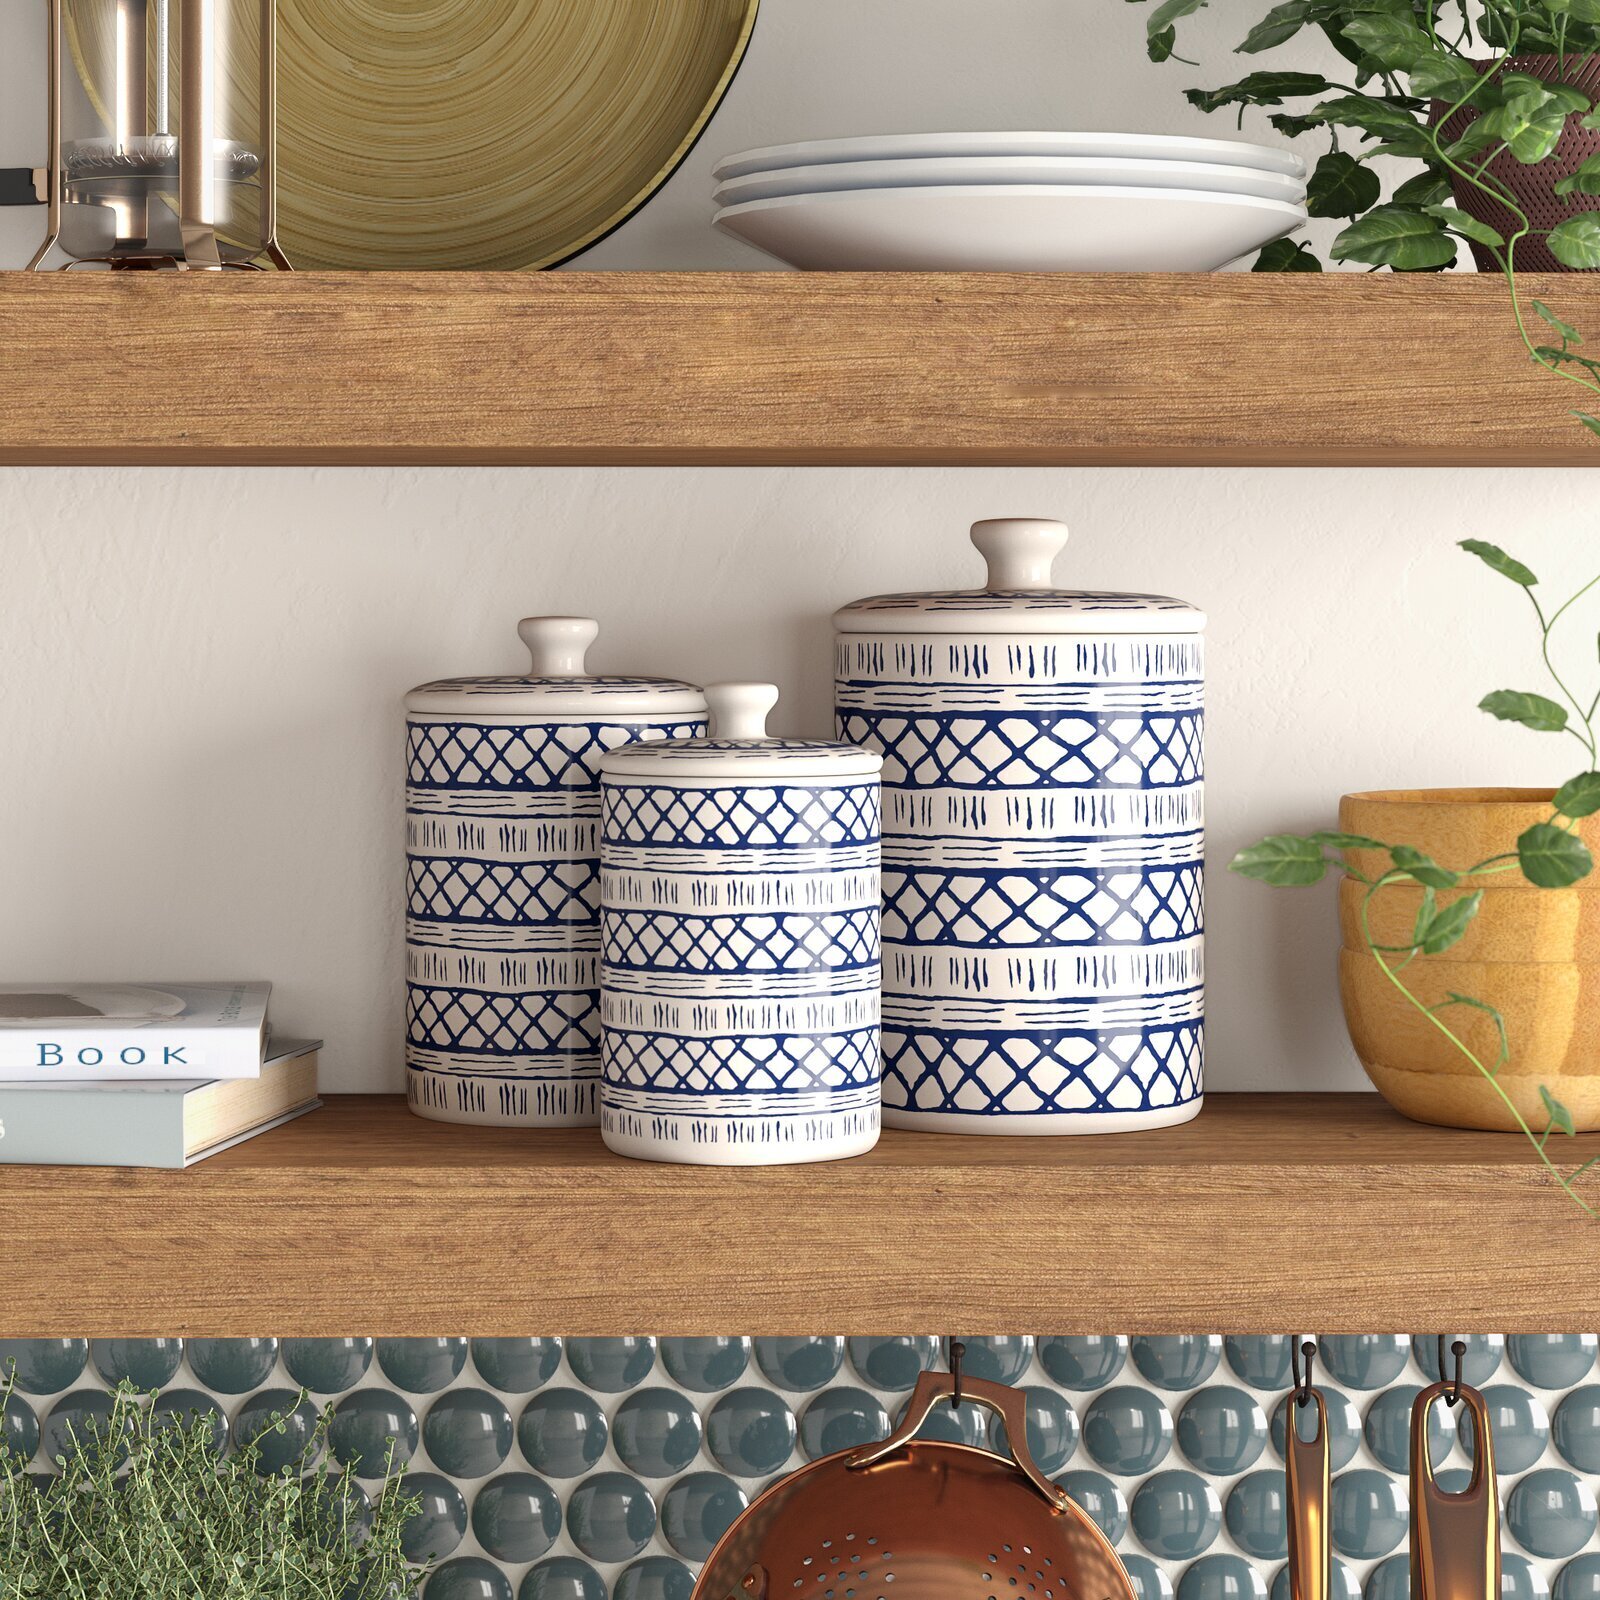 Blue and White Decorative Kitchen Canisters   